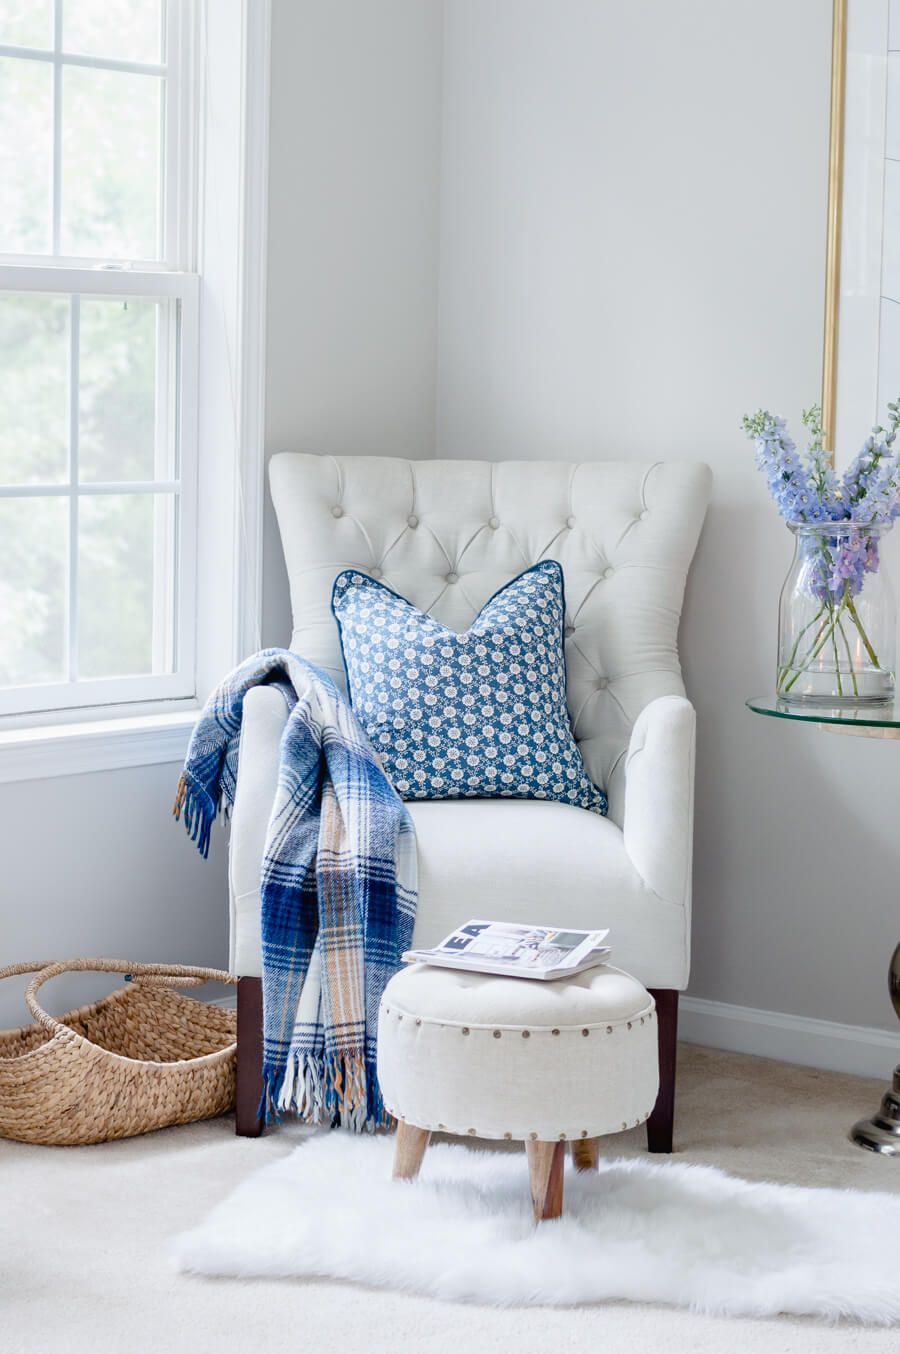 5 Easy Tips For A Cozy Master Bedroom Sitting Area - The Home I Create